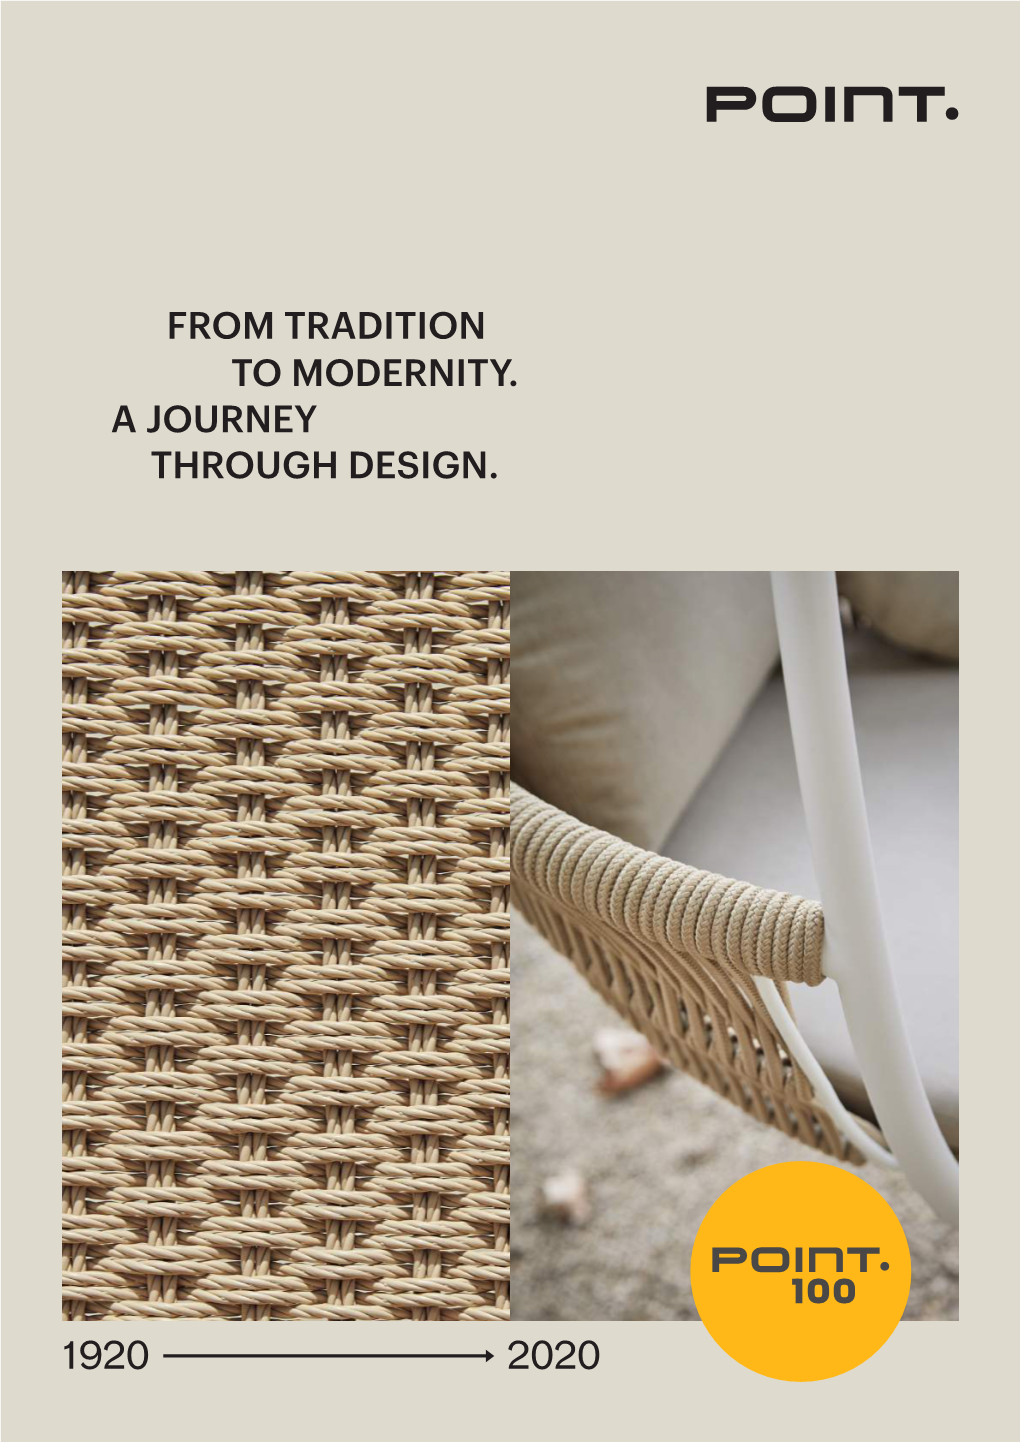 Through Design. from Tradition to Modernity. A